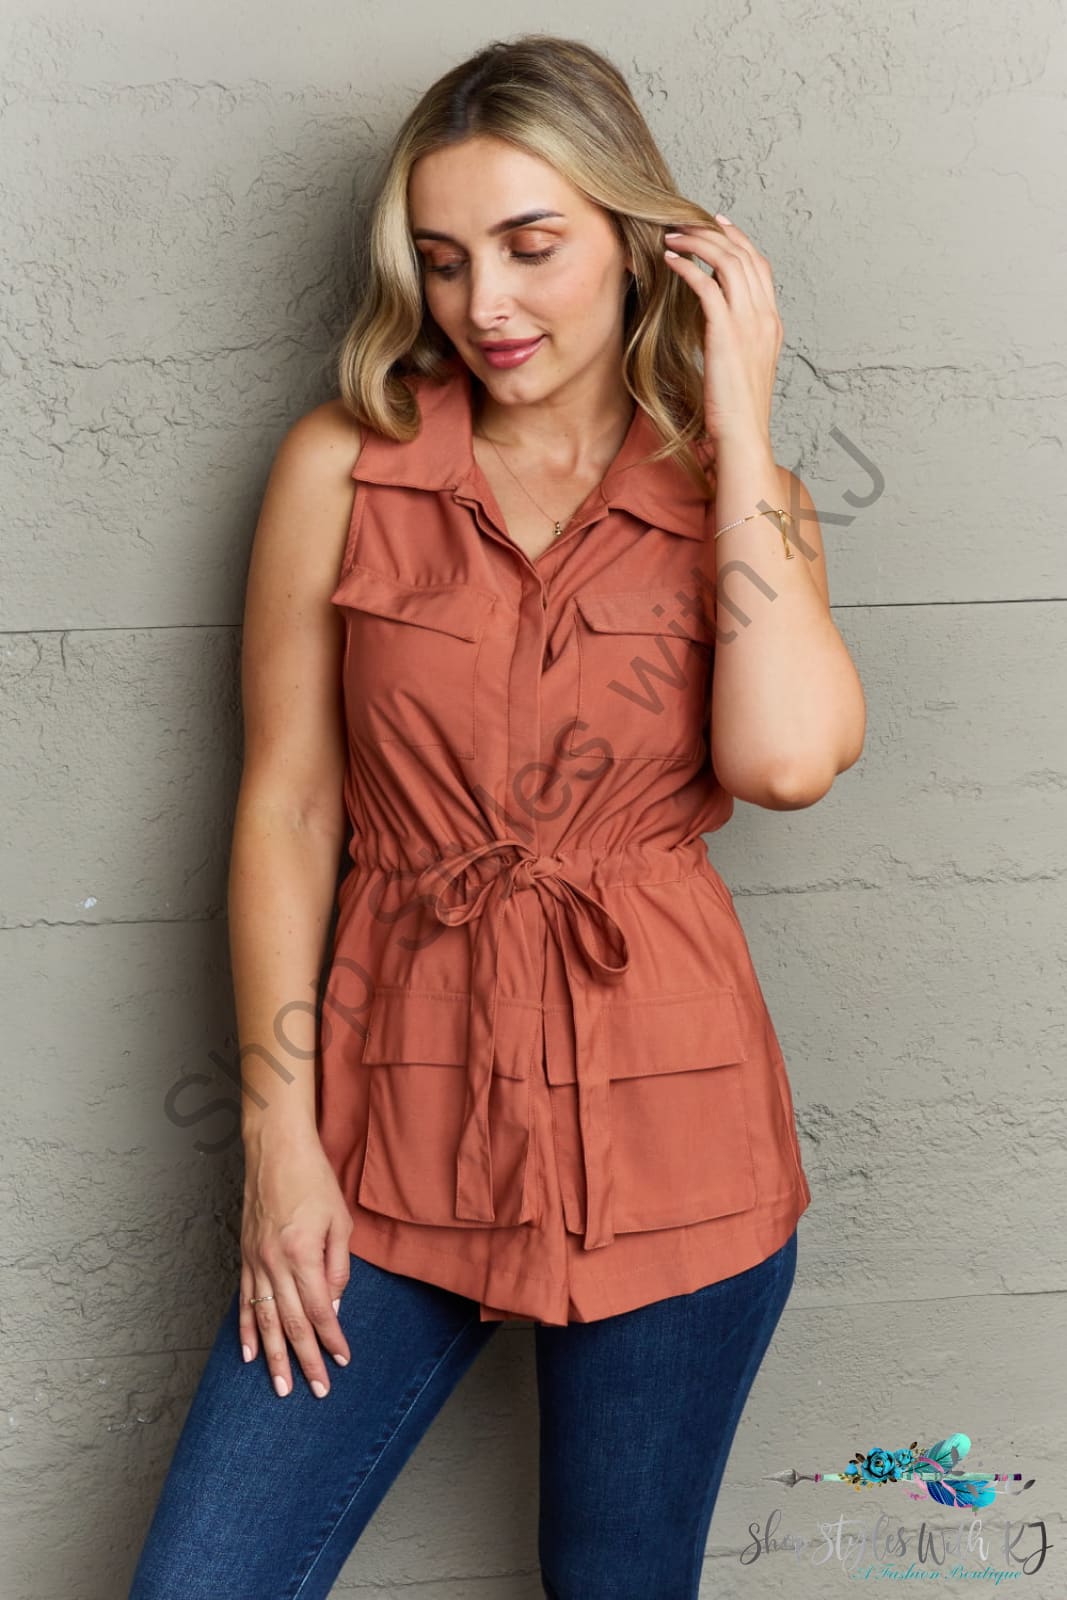 Ninexis Follow The Light Sleeveless Collared Button Down Top Brick Red / S